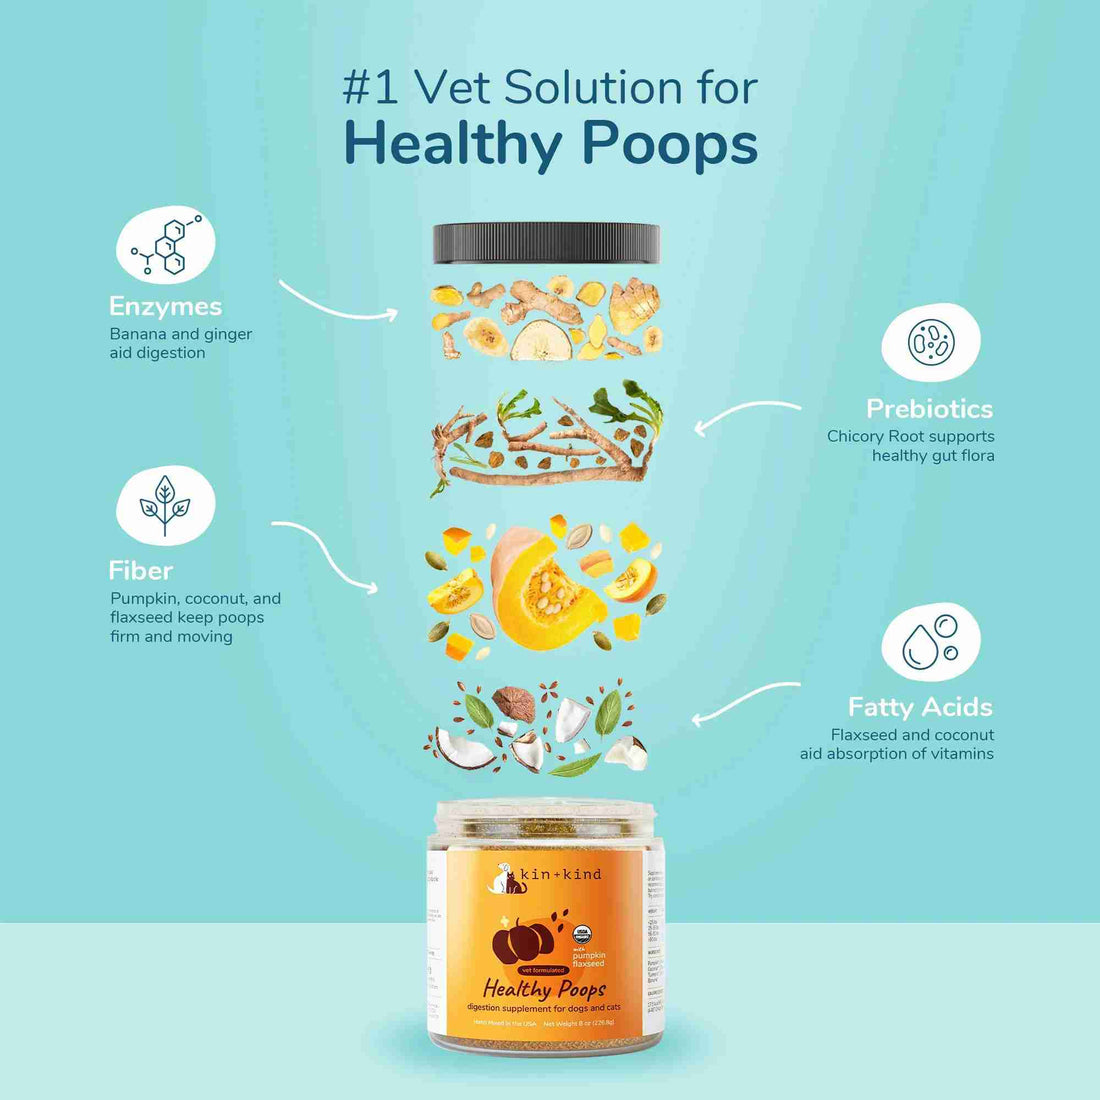 Healthy Poops ingredients with health benefits by kin and kind for dogs and cats